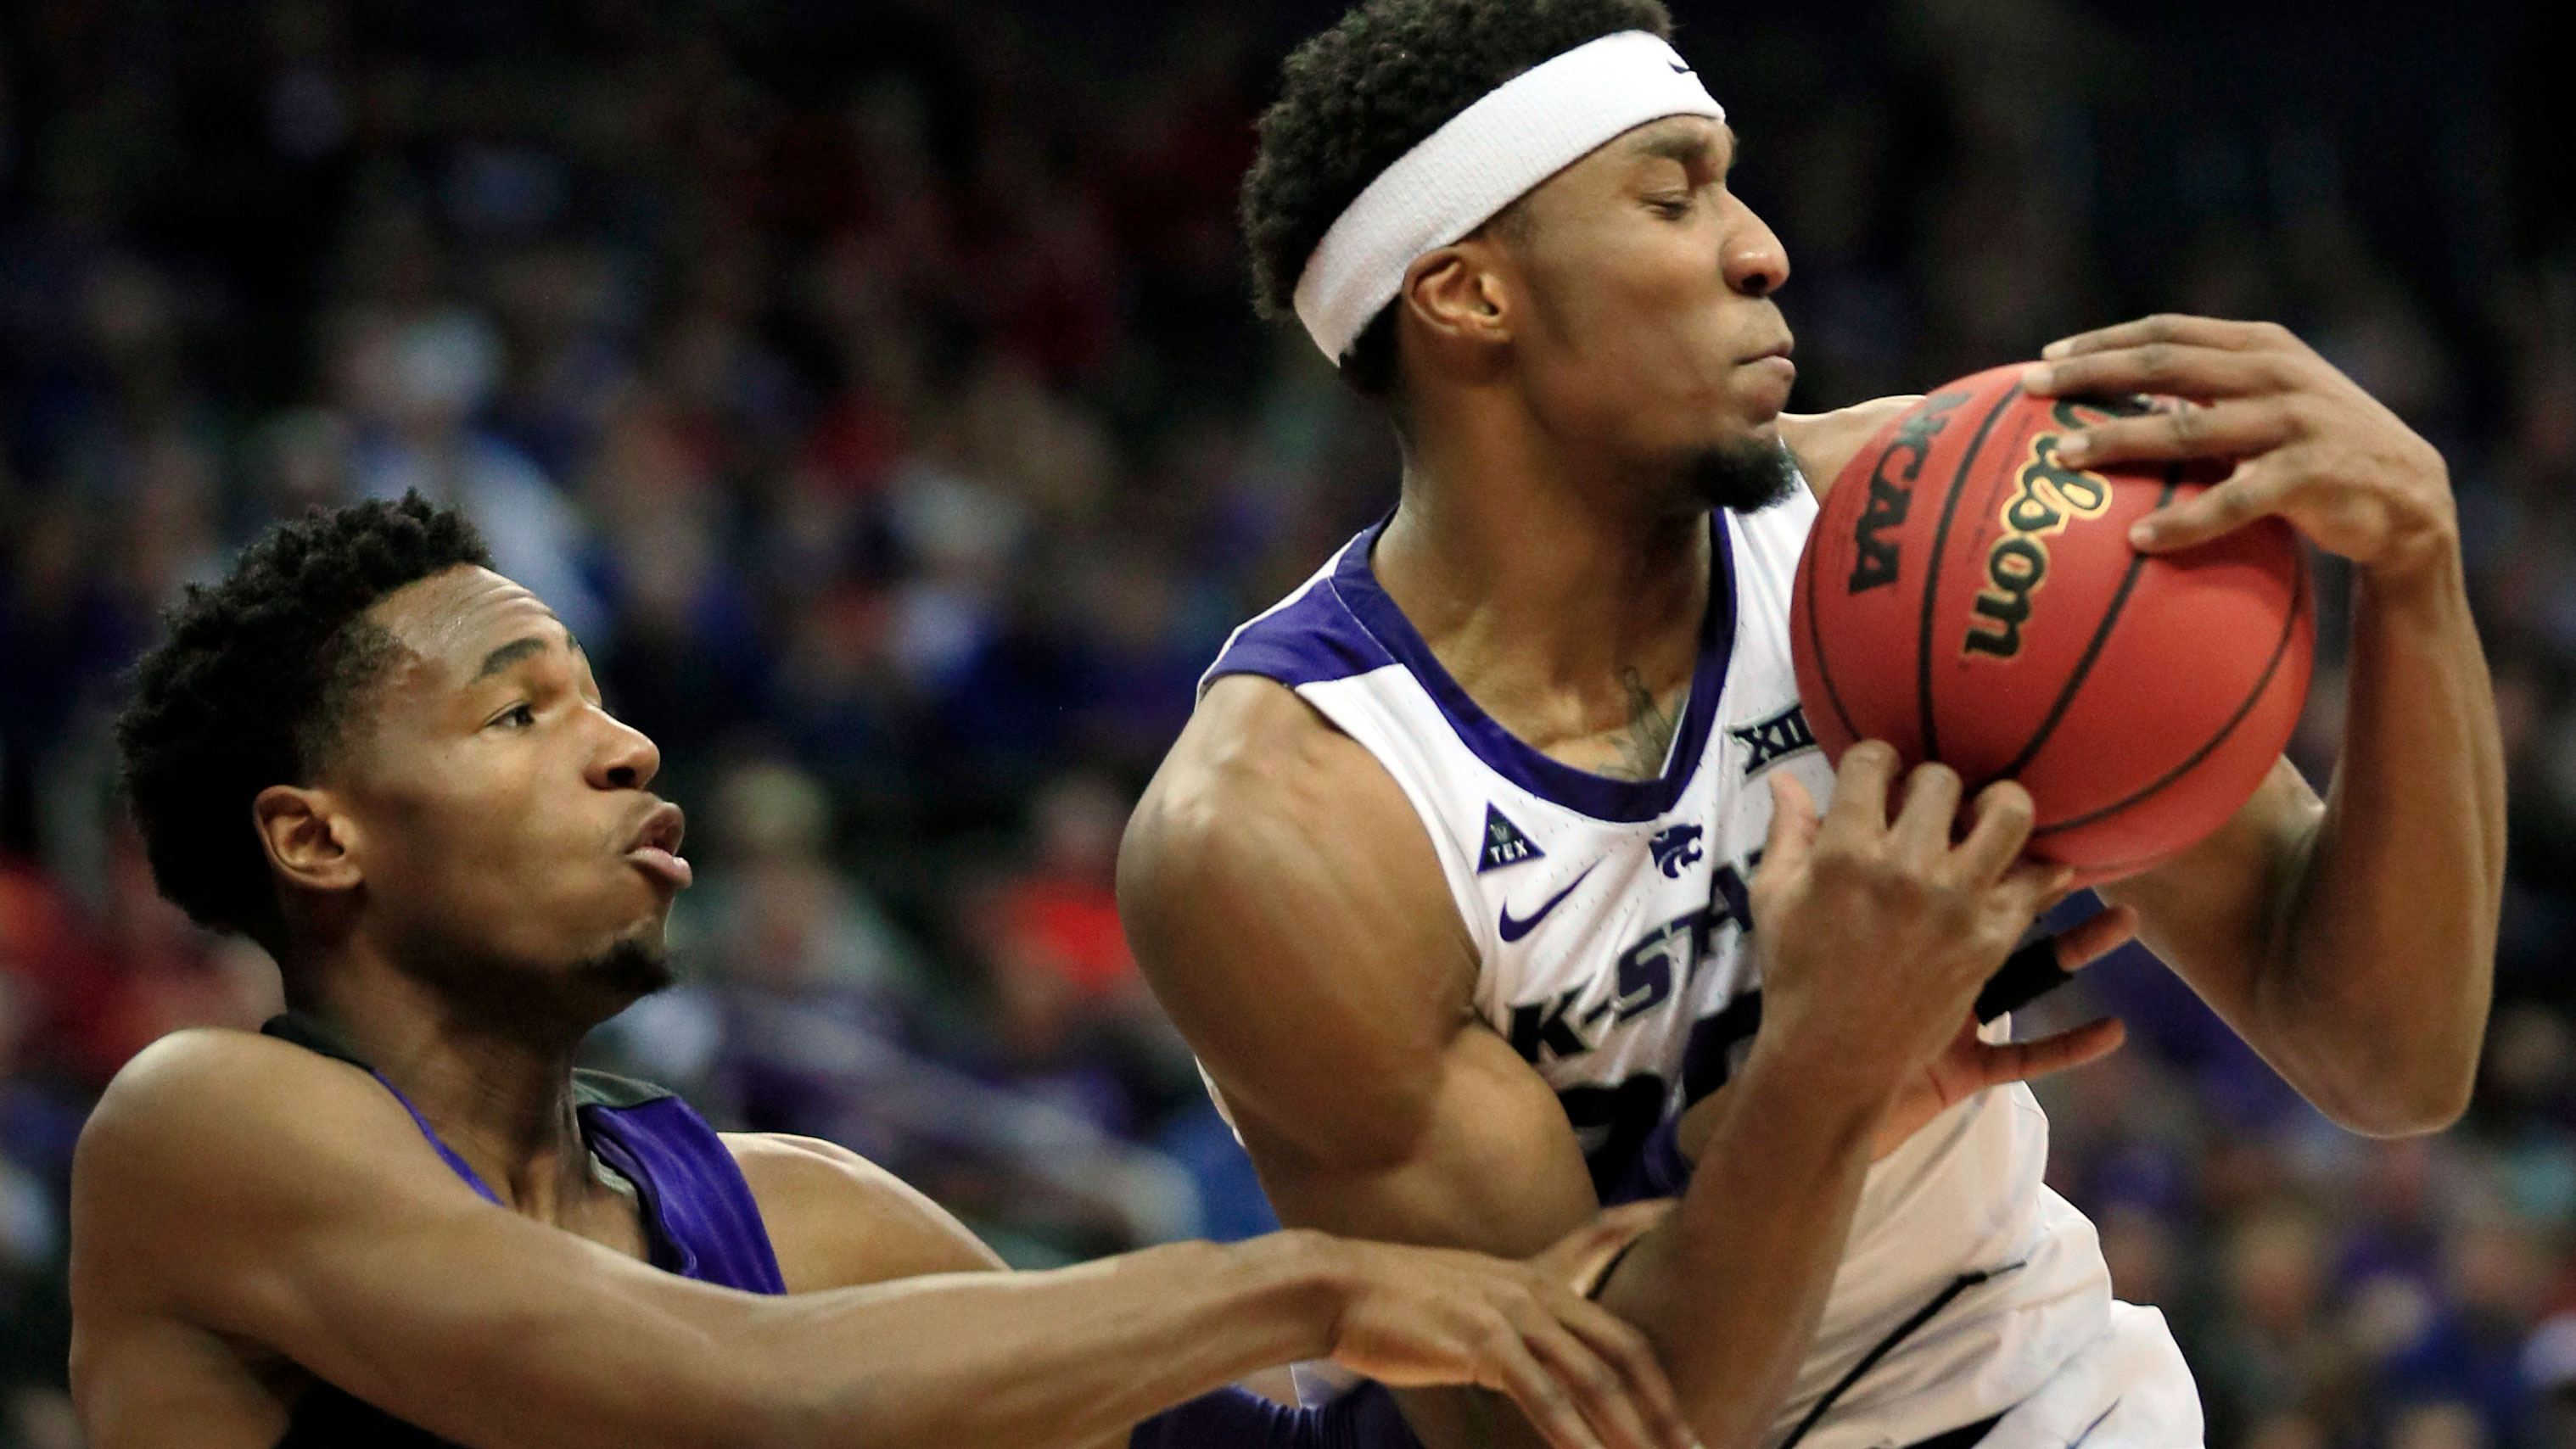 K-State overcomes slow start, Wade's absence to beat TCU 70-61